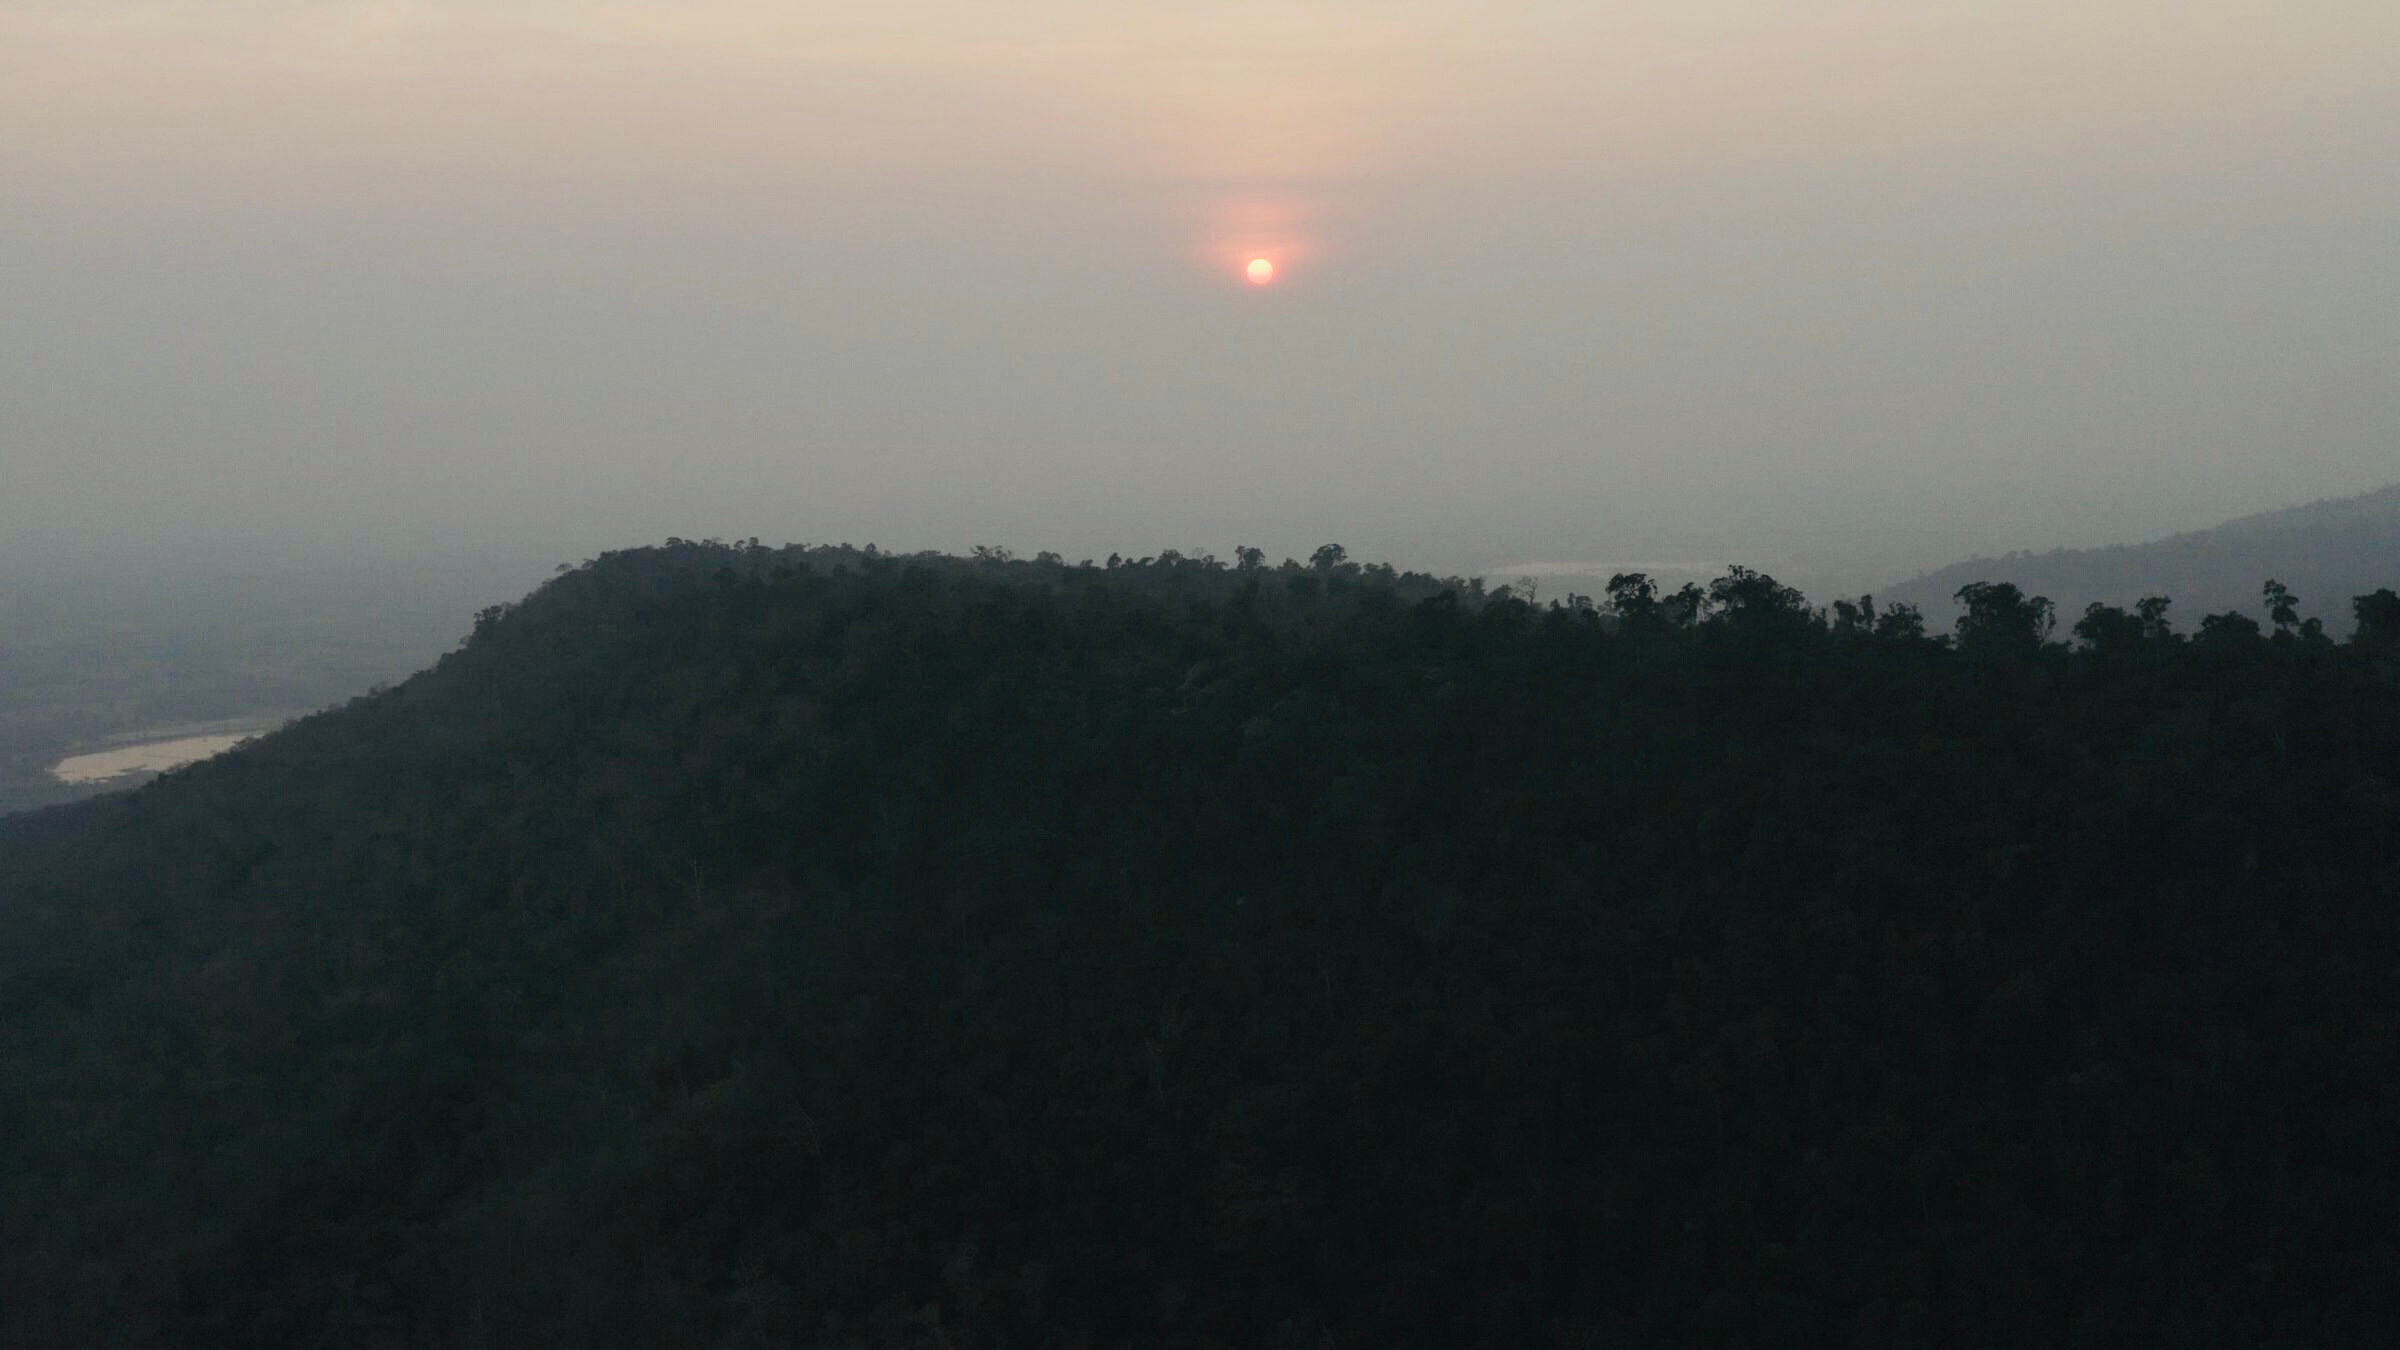 Still from Eskape. A red-orange sun shines over a forest-covered hill, it's rays diffusing out due to the foggy sky.